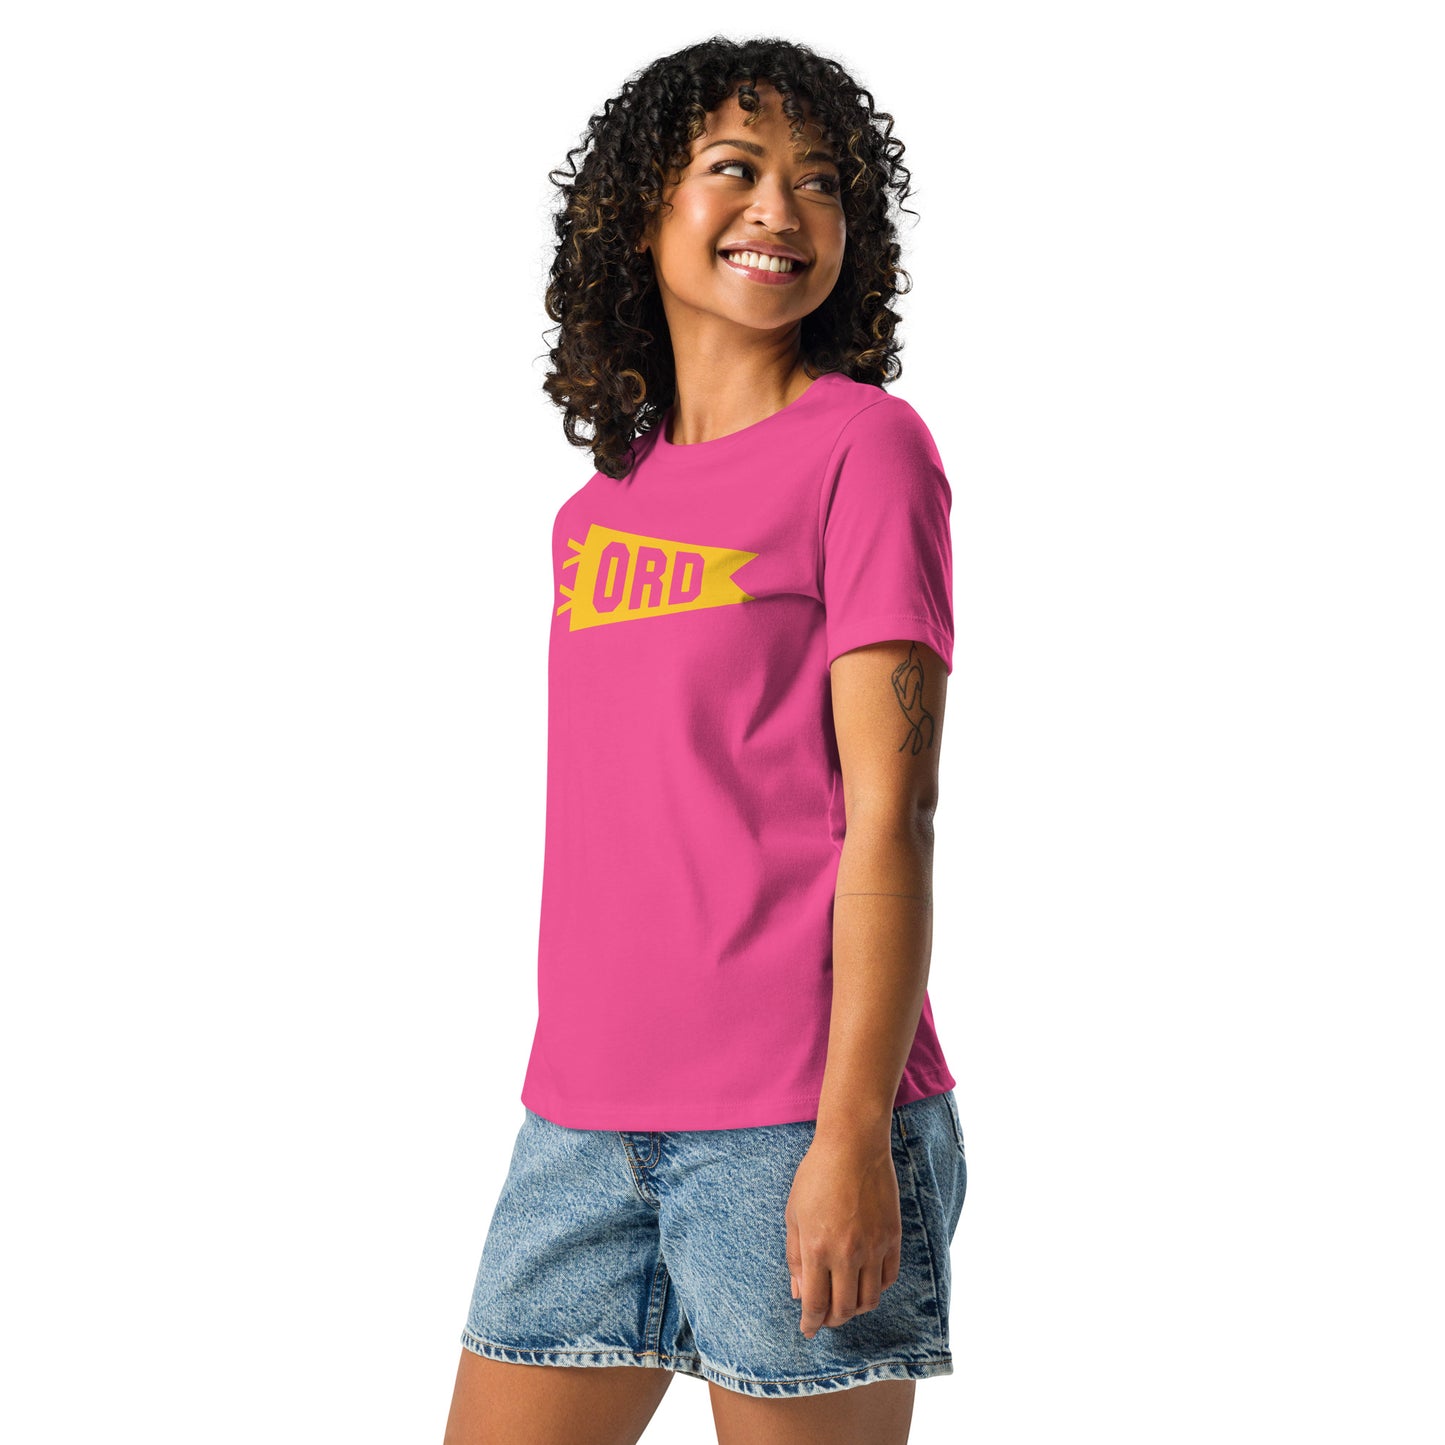 Airport Code Women's Tee - Yellow Graphic • ORD Chicago • YHM Designs - Image 06